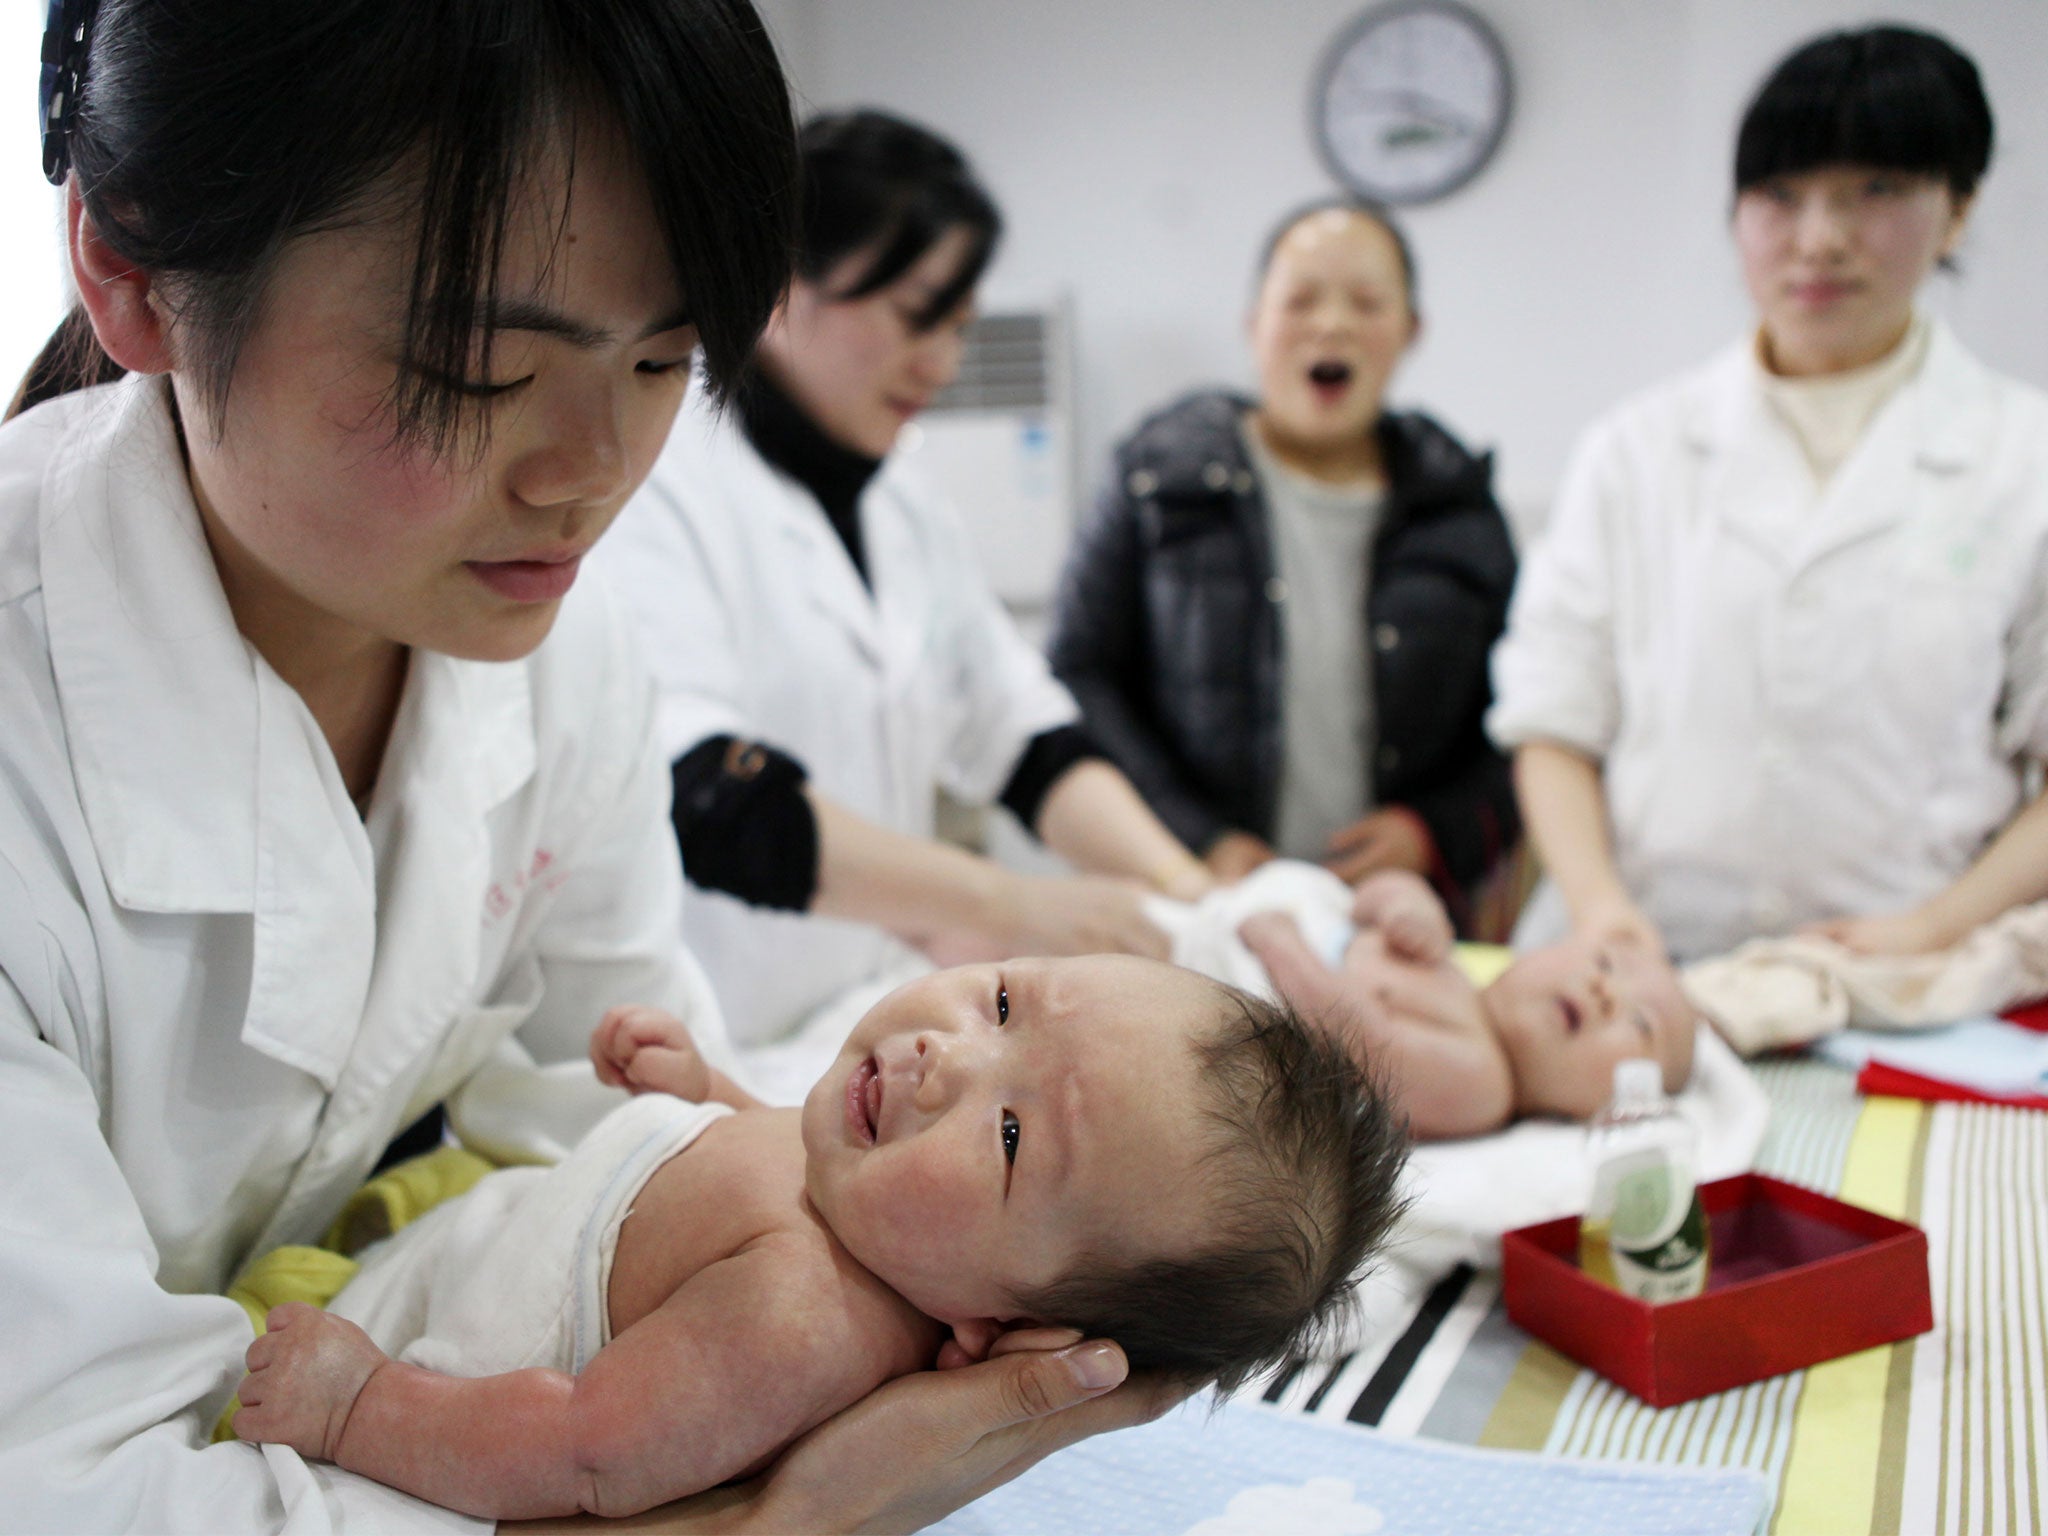 Early reports suggest the number of children born in China in 2018 is down significantly on the year prior